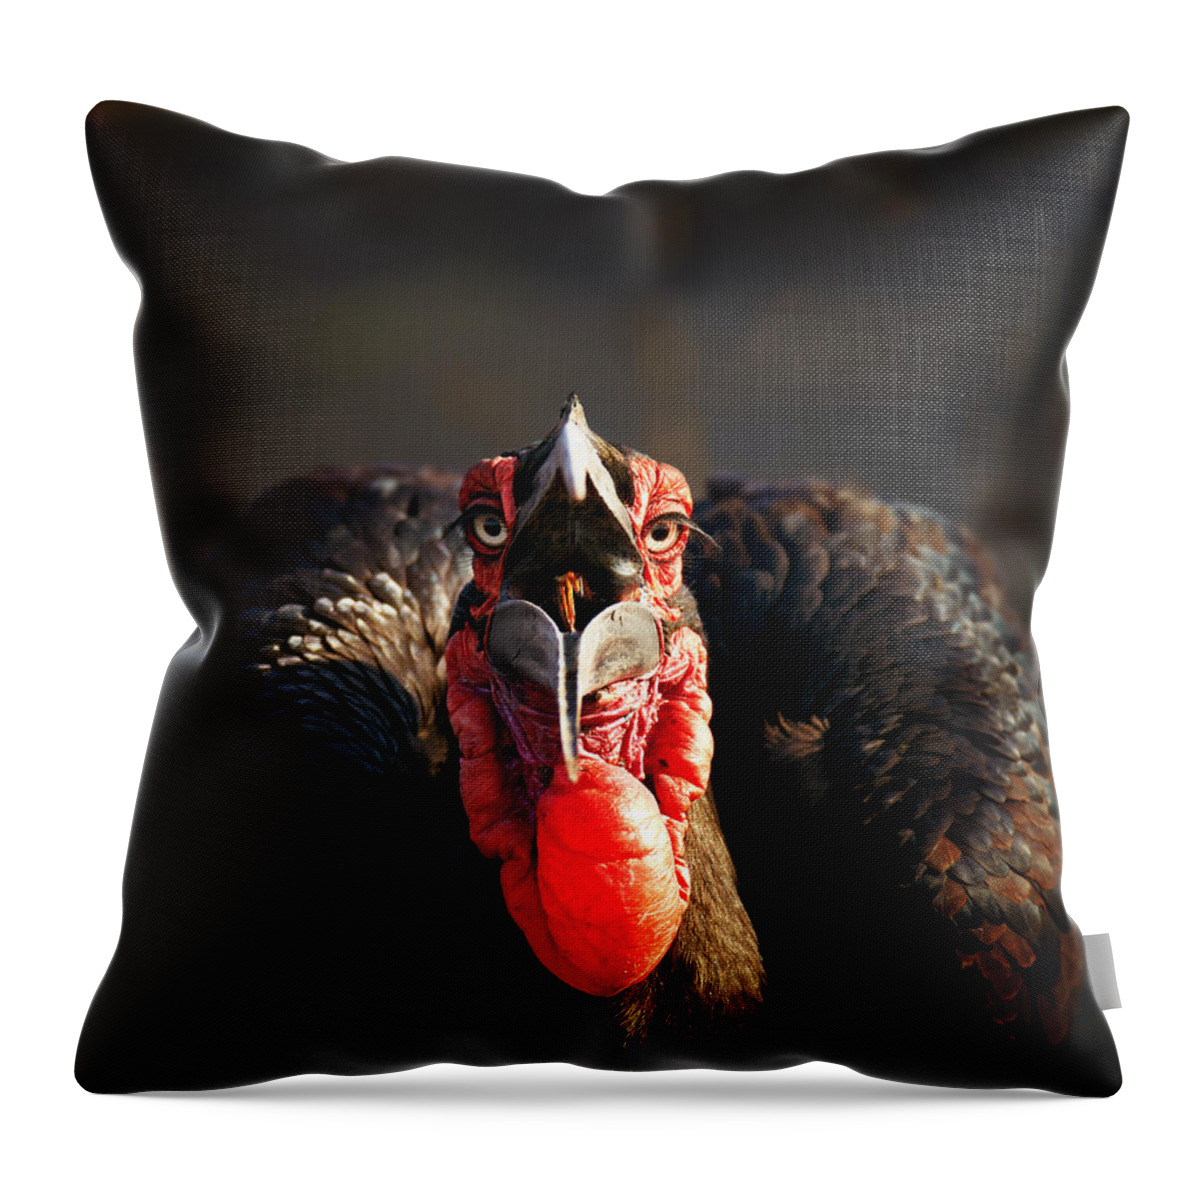 Southern Throw Pillow featuring the photograph Southern Ground Hornbill swallowing a seed by Johan Swanepoel